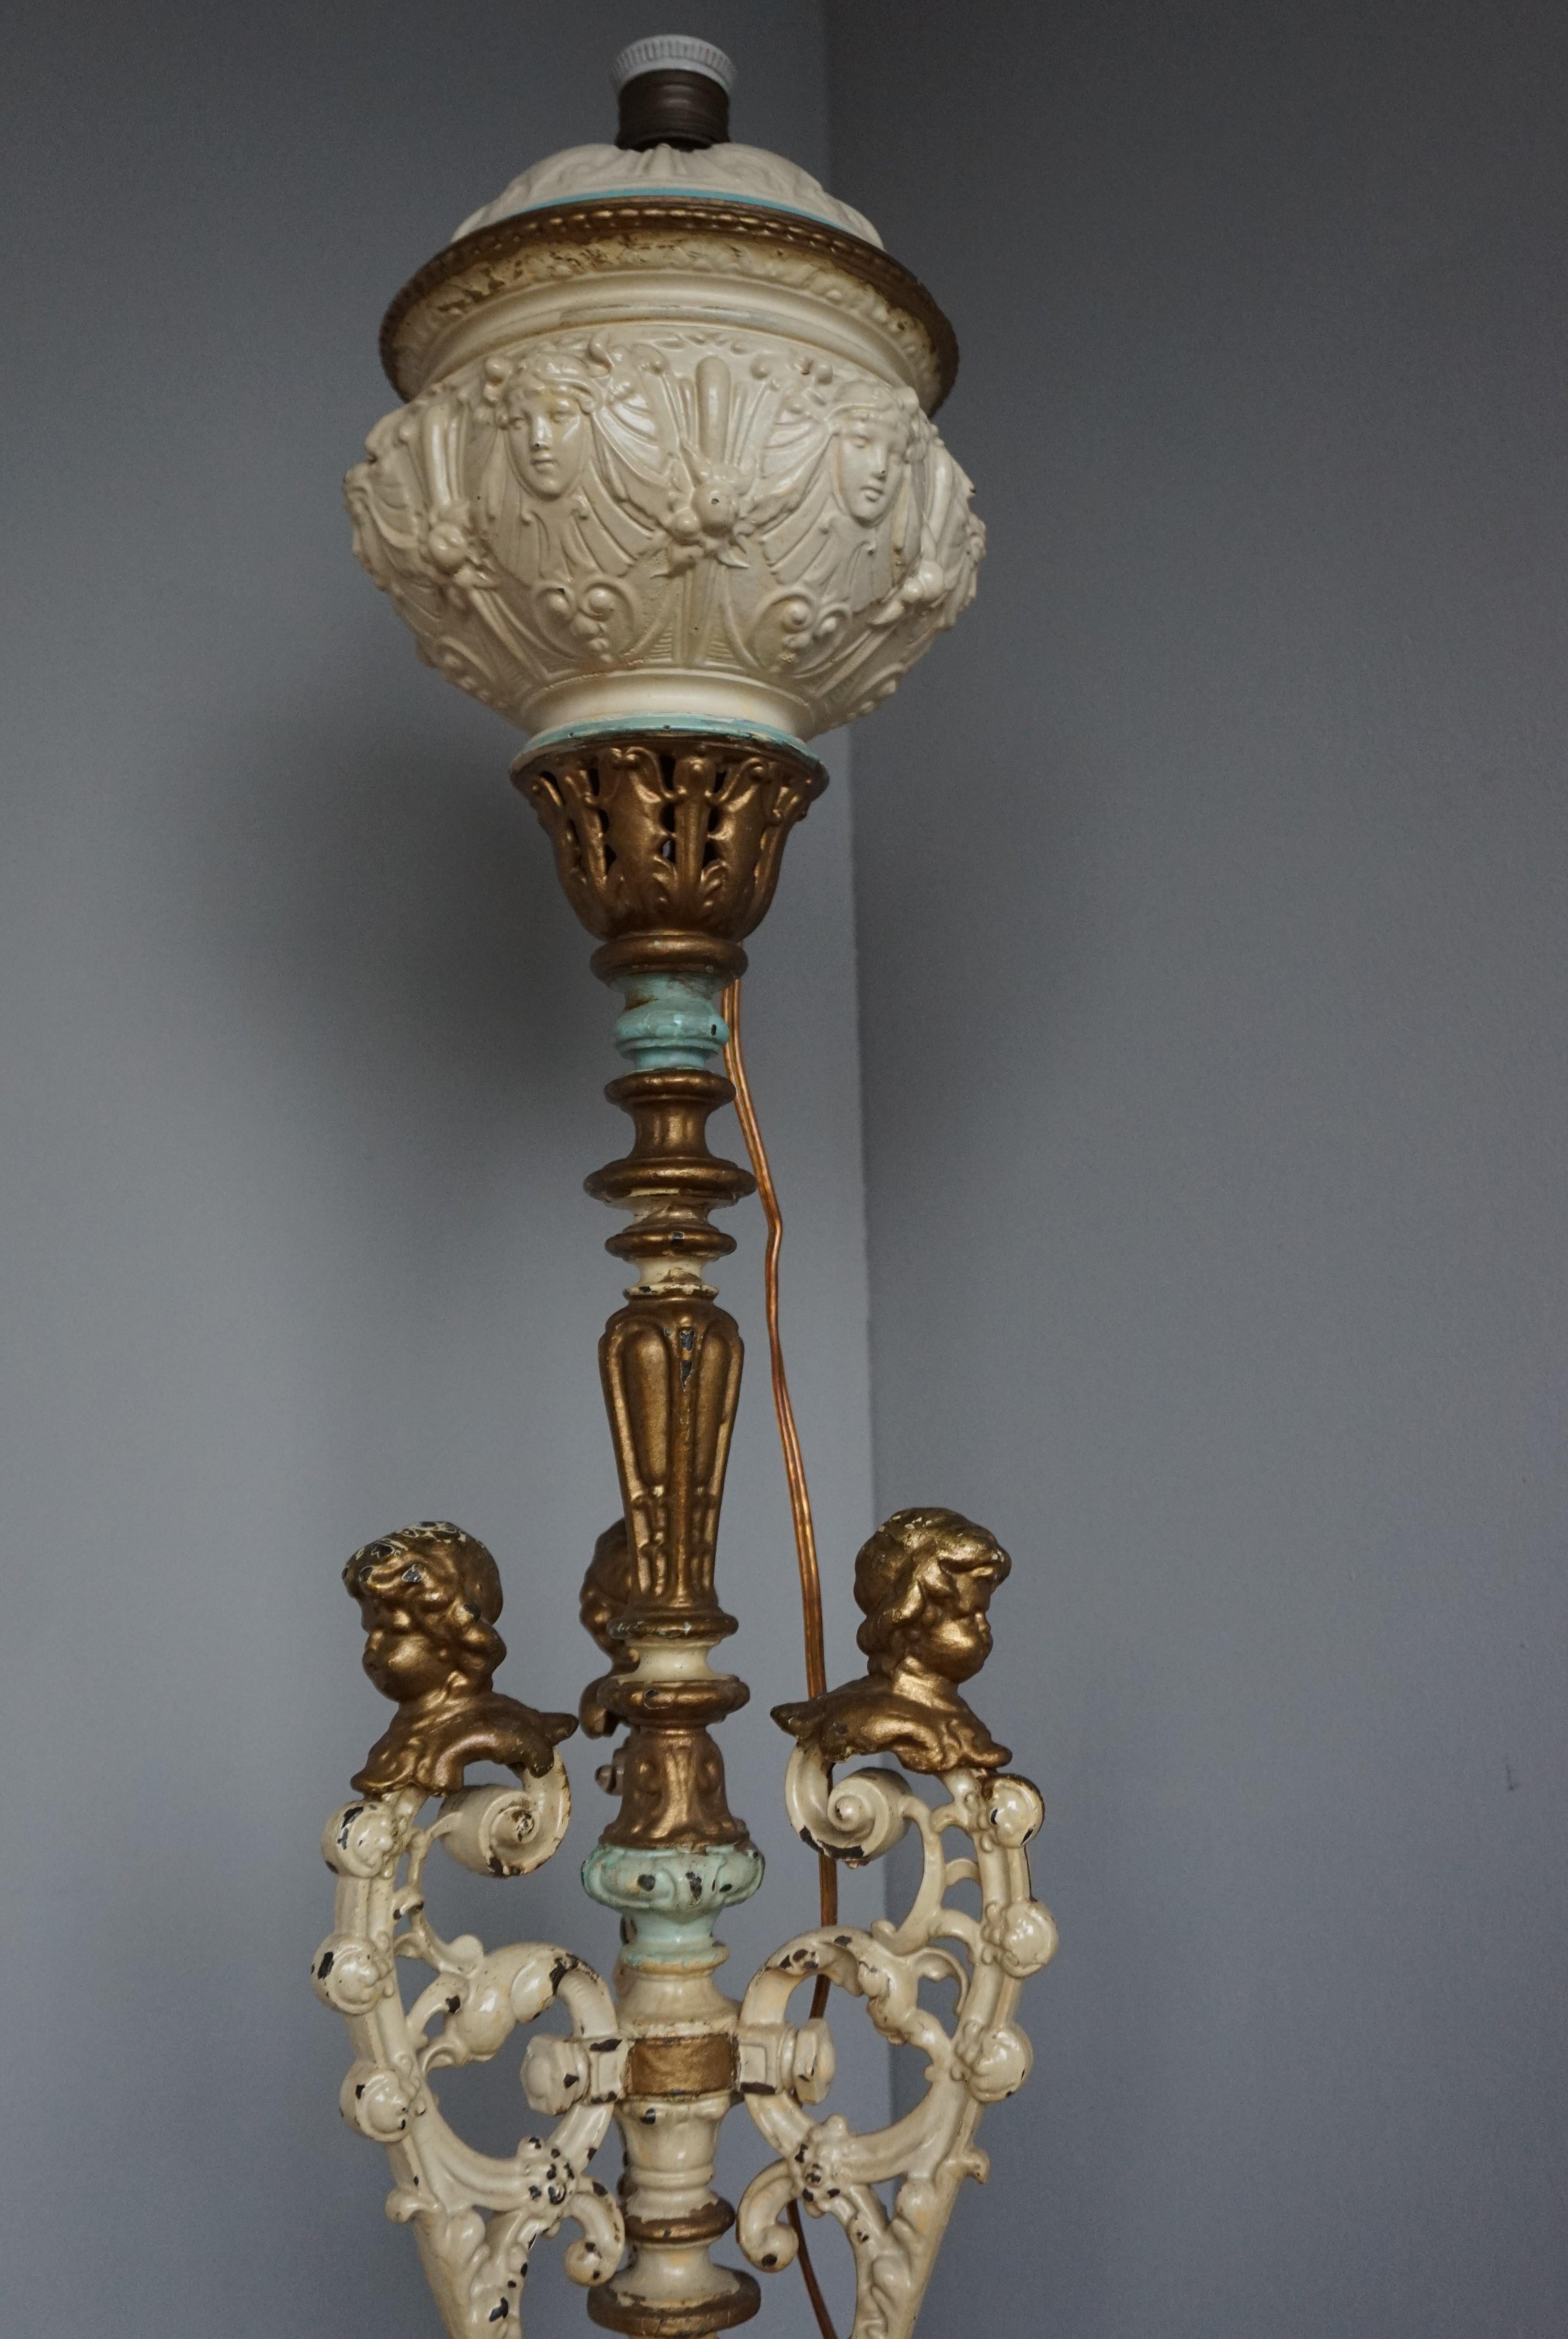 Antique and Painted Cast Iron Baroque Revival Floor Lamp w. Putti Bust Sculpture For Sale 9